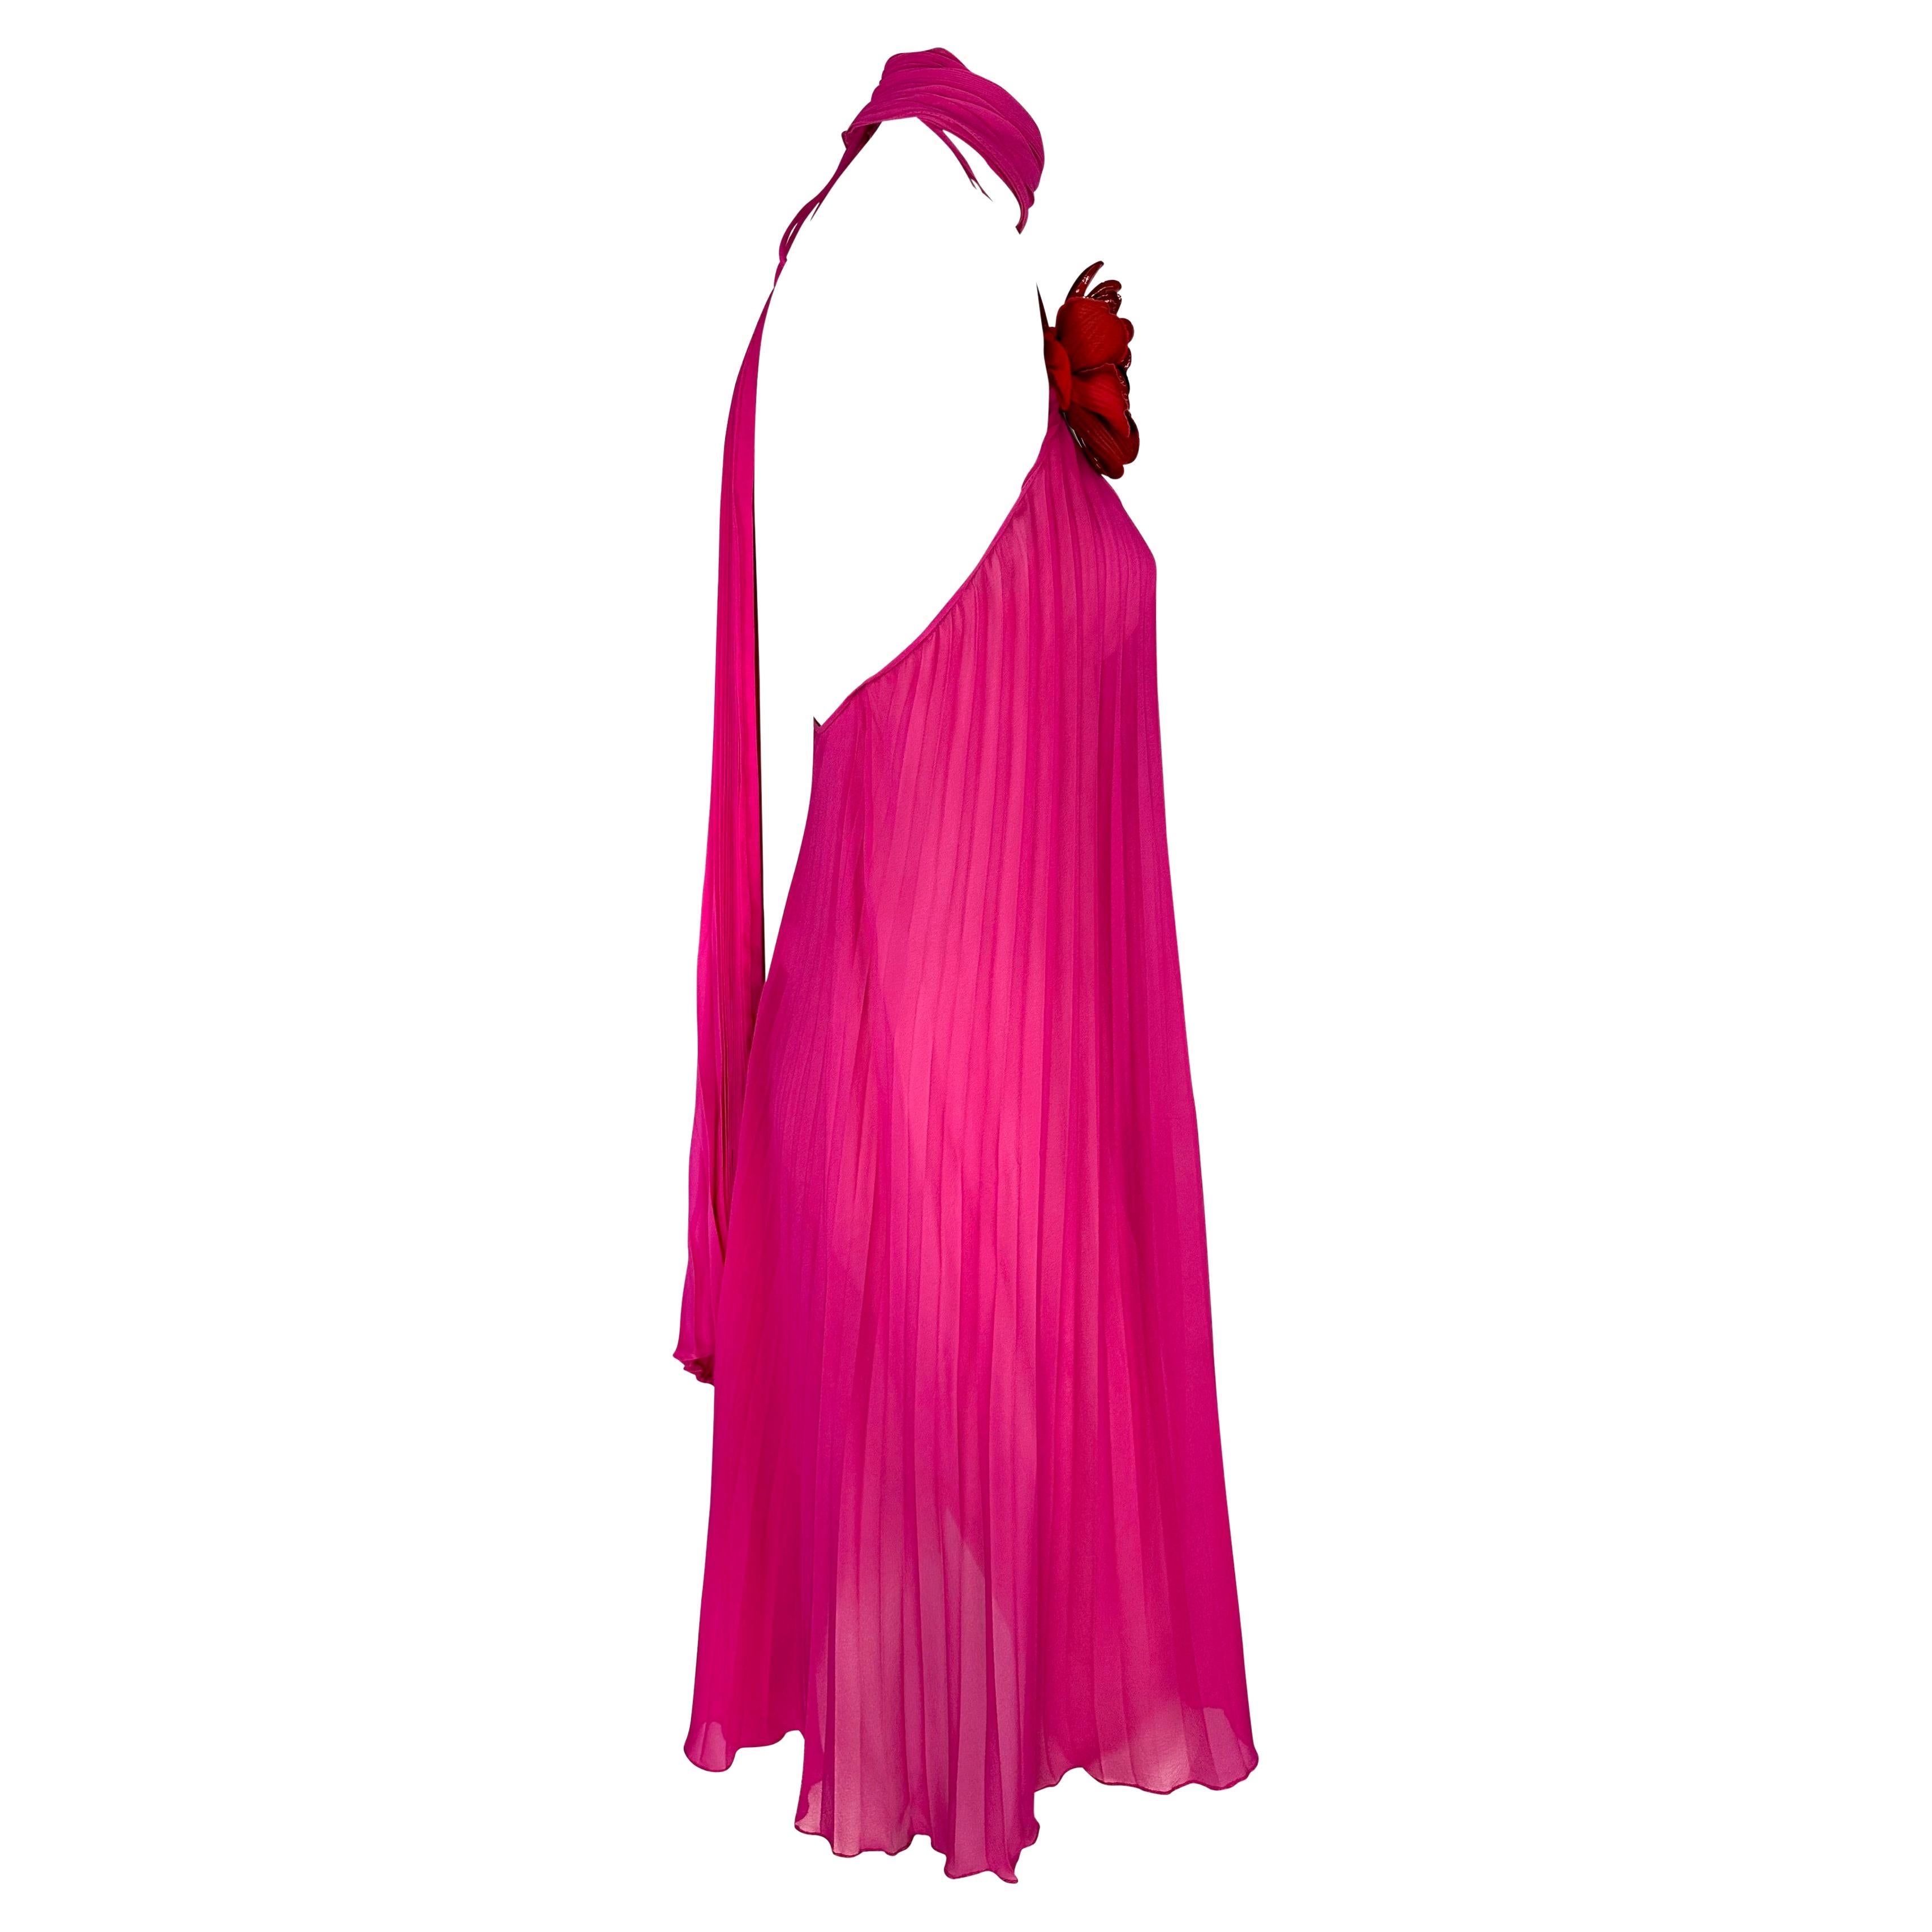 F/W 2000 Dolce & Gabbana Sheer Hot Pink Pleated Chiffon Floral Appliqué Dress For Sale 4